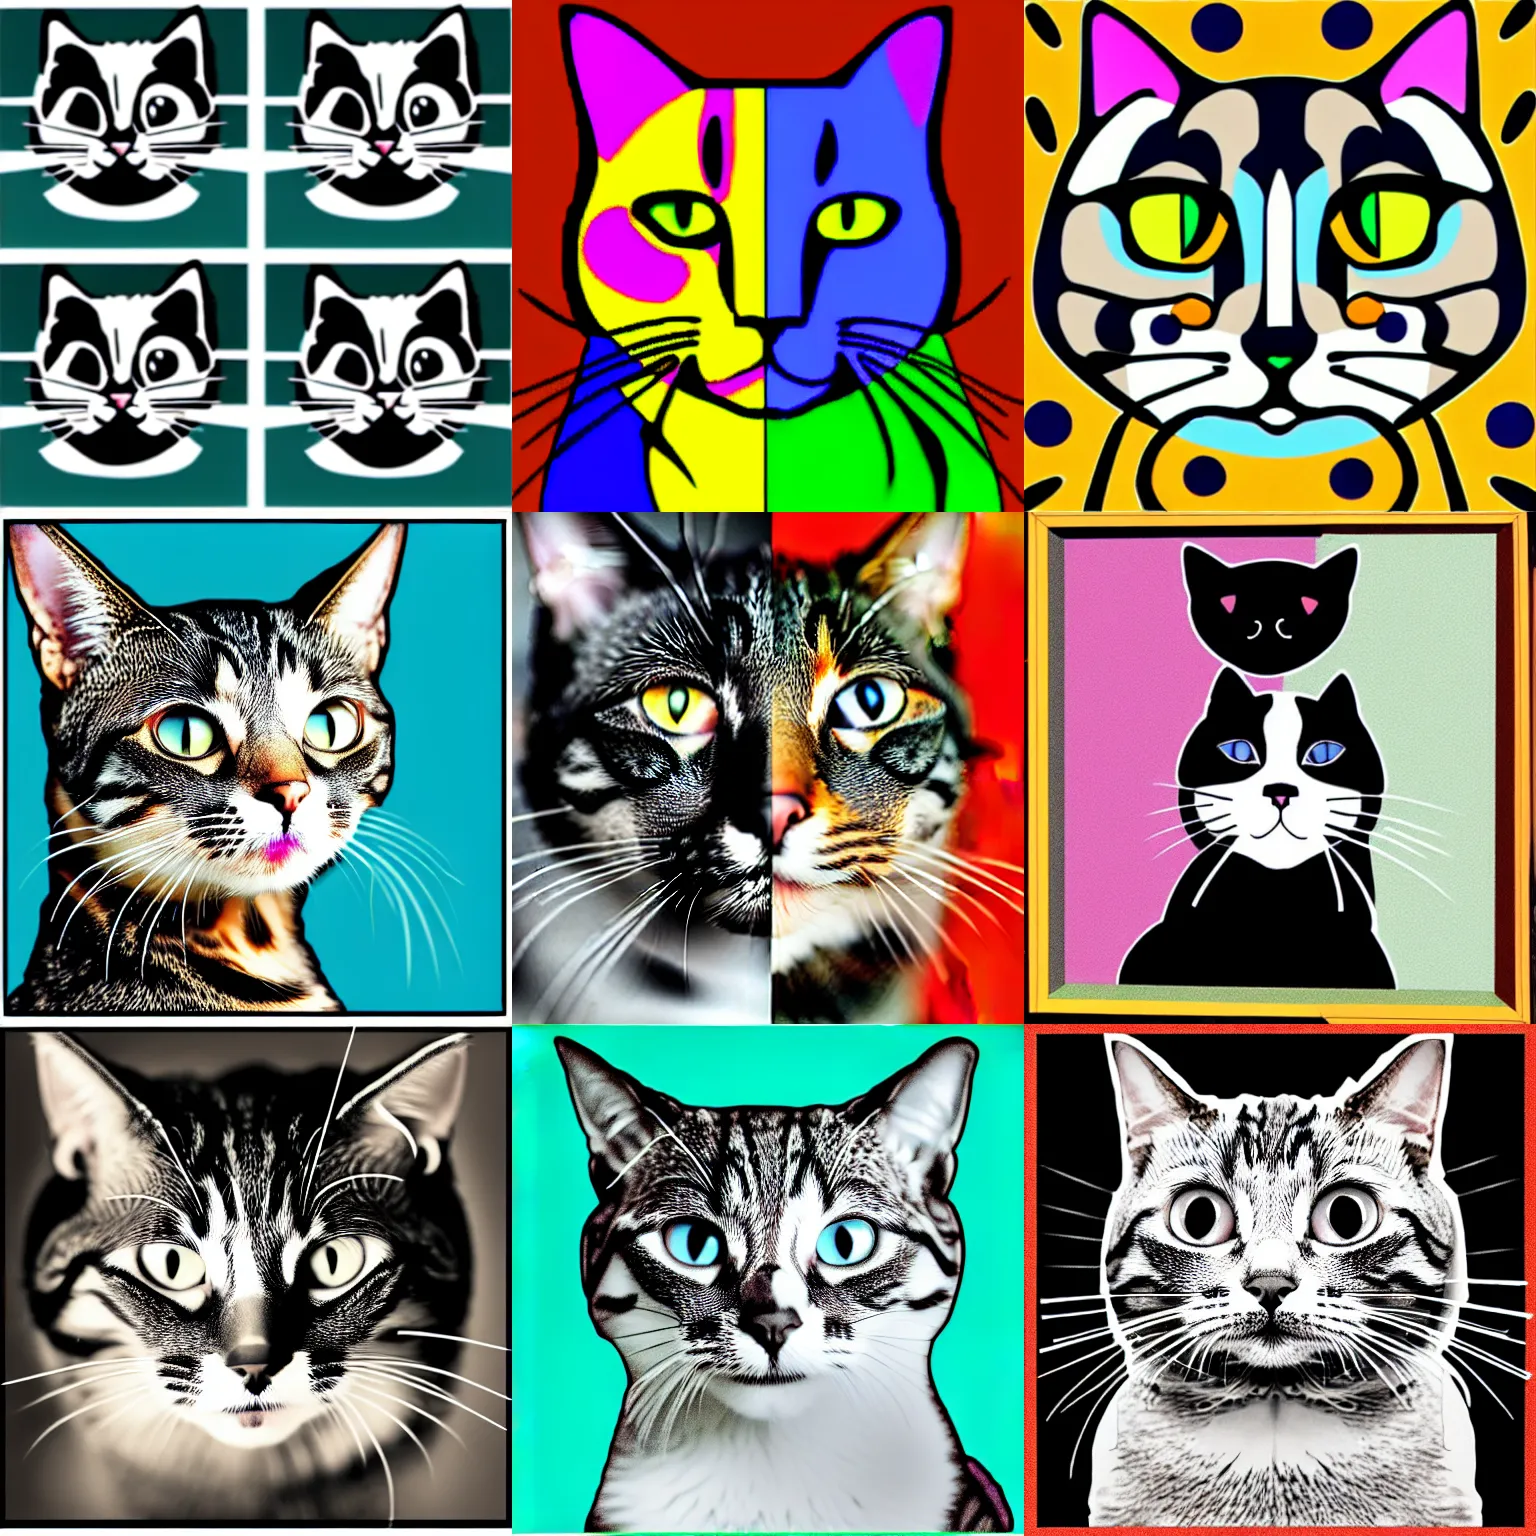 Prompt: picture divided into equal areas. each area contains a different image of a cat